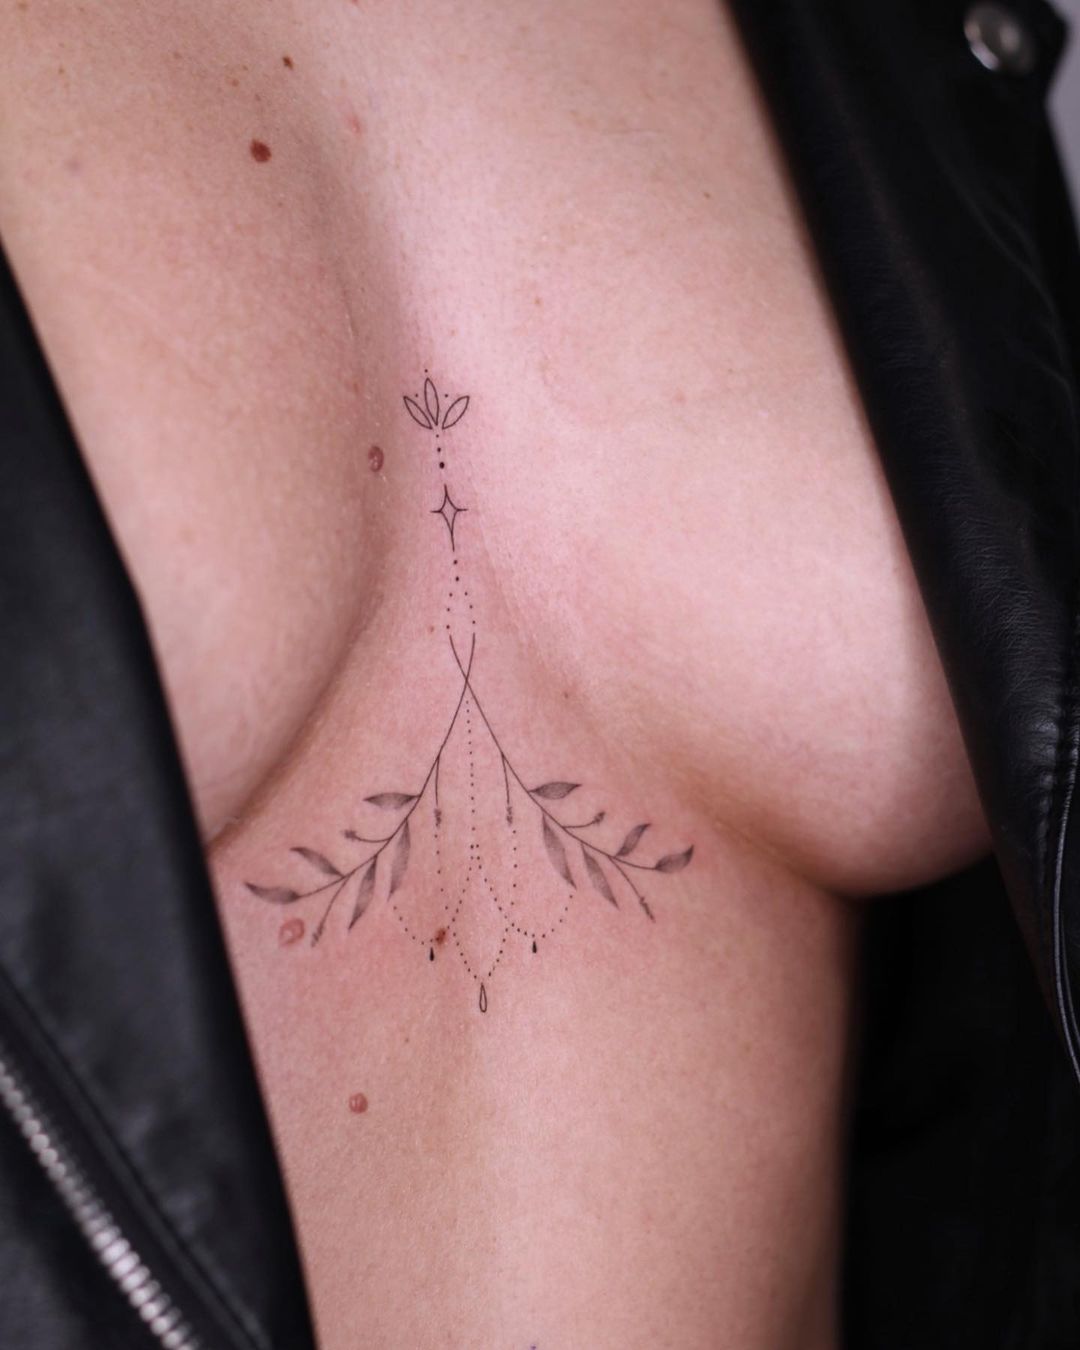 Plus-Size Woman Gets Sternum Tattoo to Boost Confidence - TatRing News